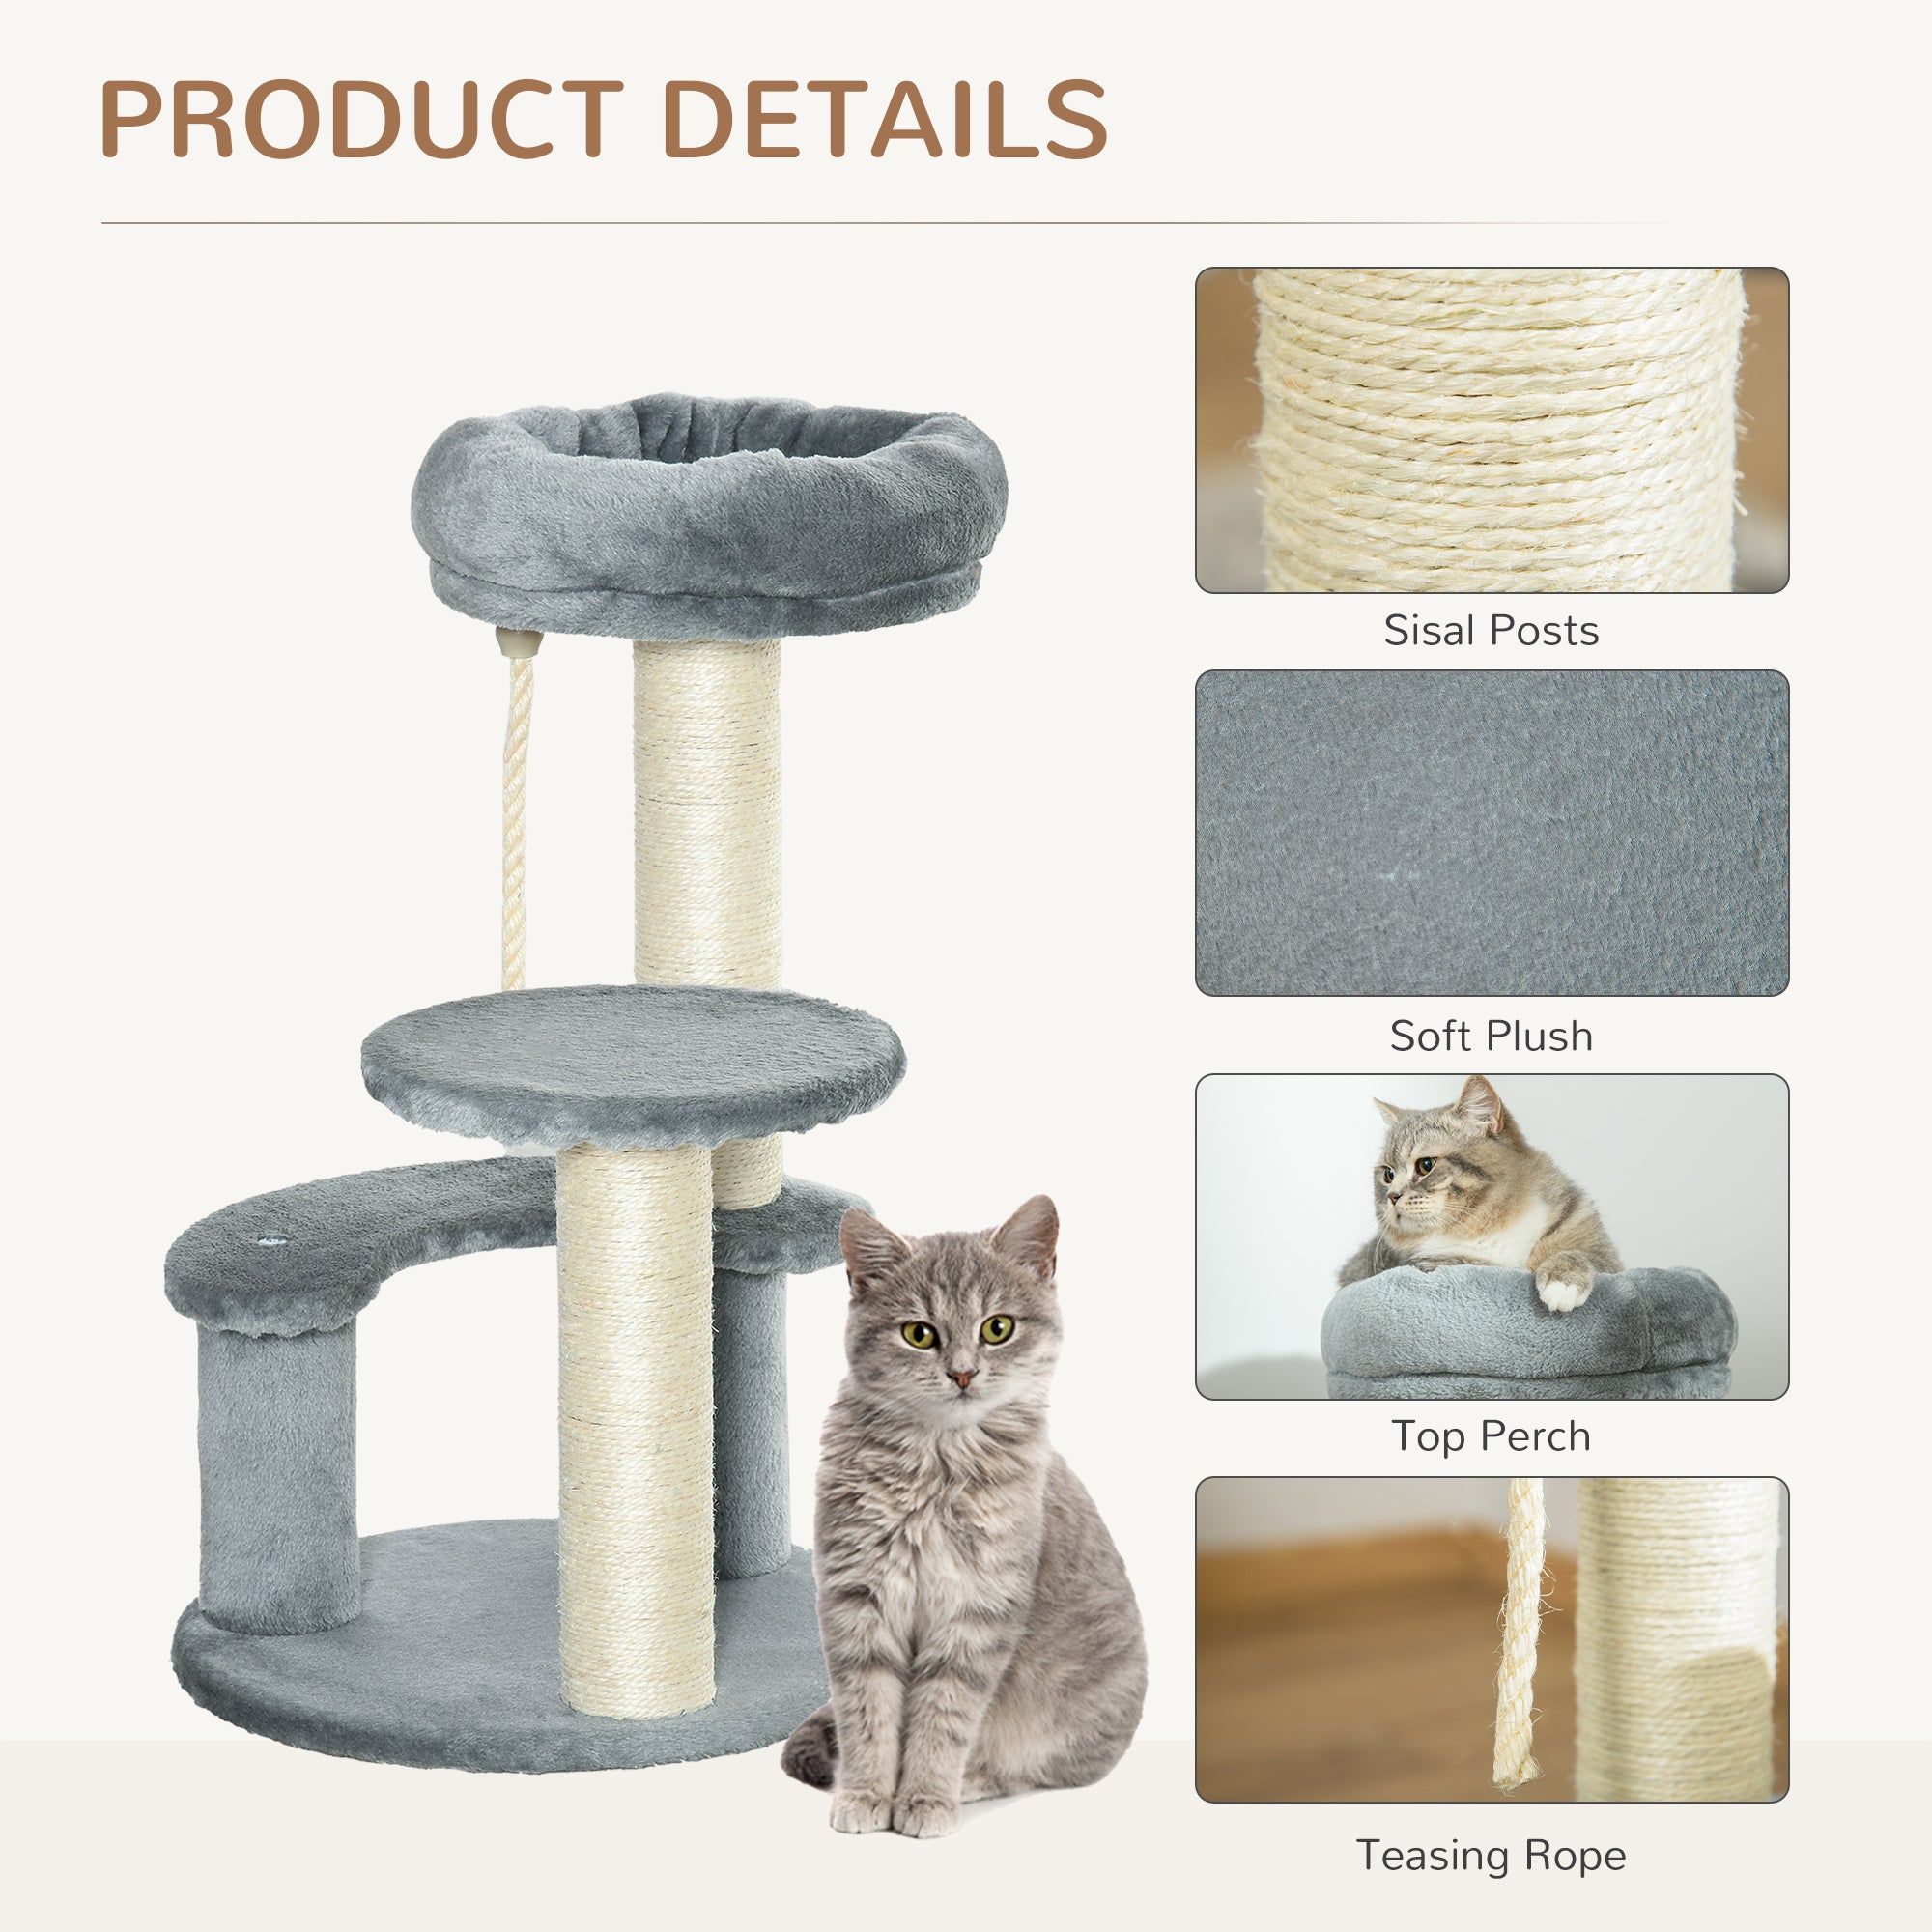 PawHut Cat Tree 65 cm, Kitty Scratcher, Kitten Activity Centre with 2 Perches & Hanging Sisal Rope, Grey